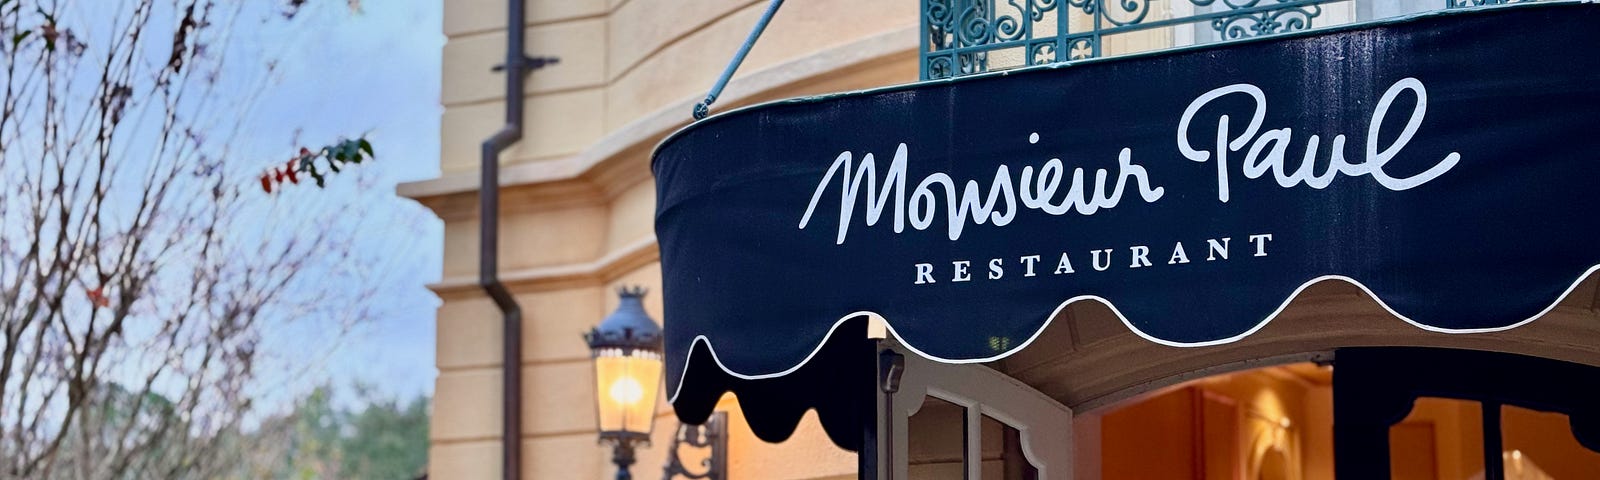 Image of the canopy at the entrance of the Monsieur Paul restaurant, at Disney’s EPCOT